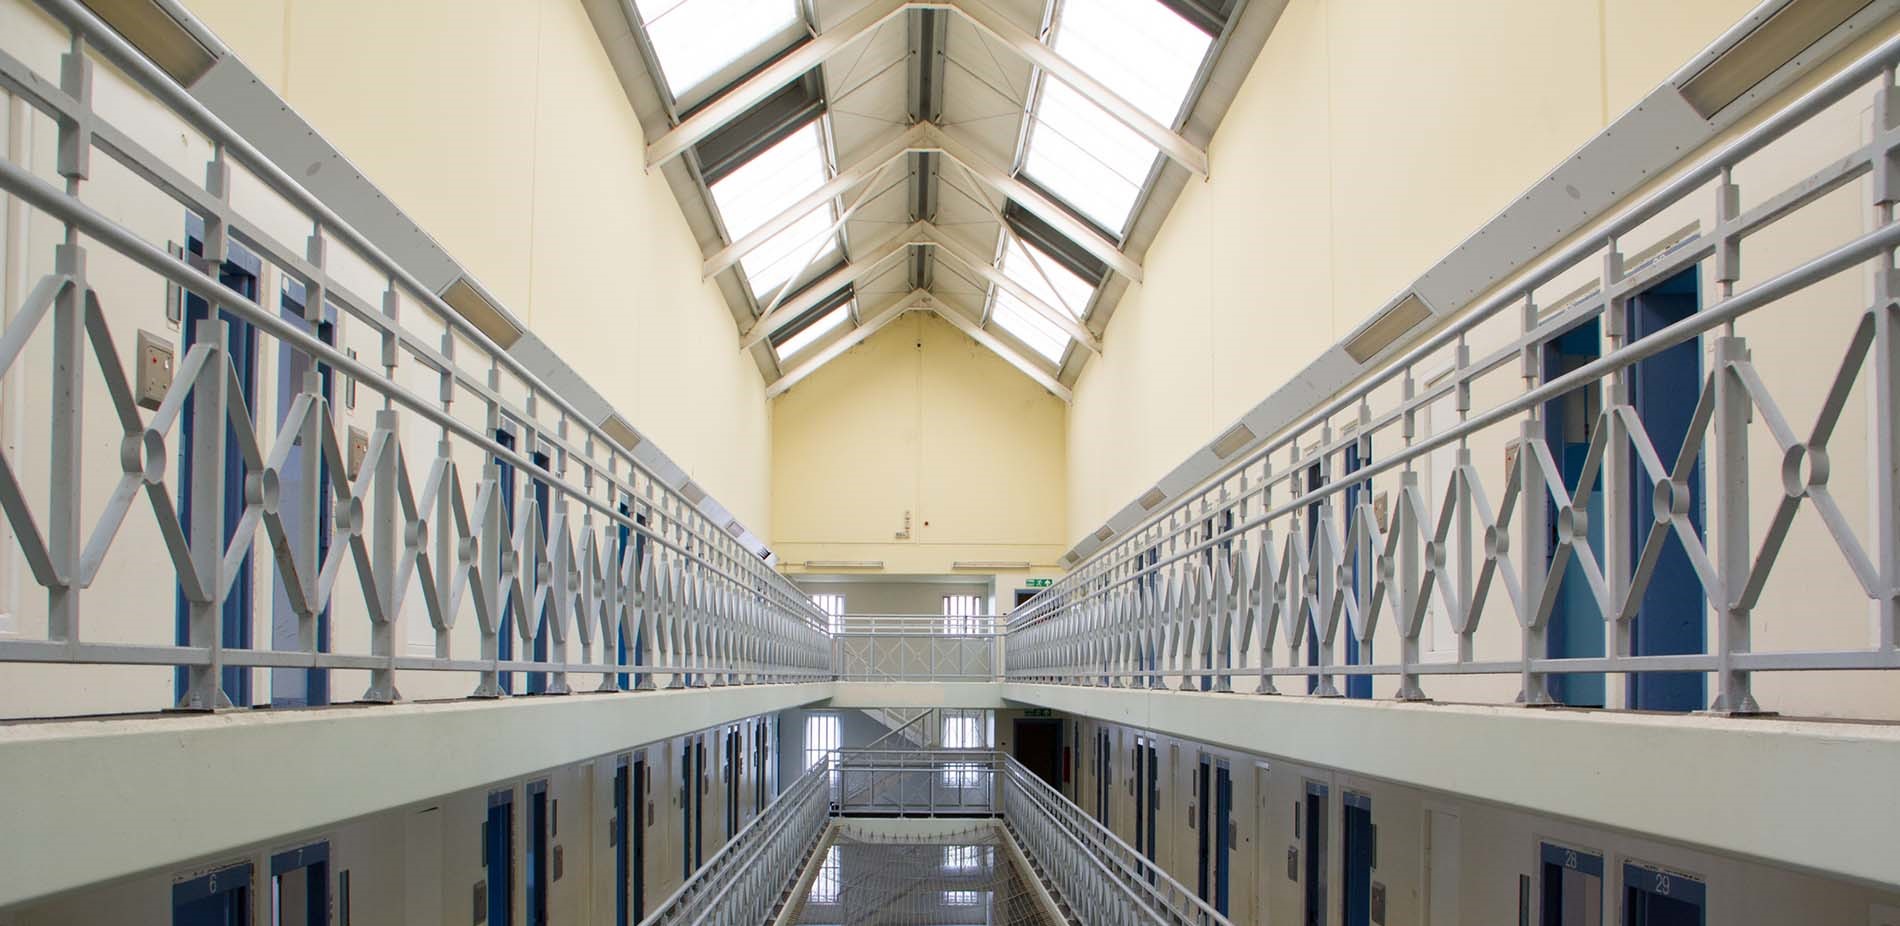 Prison cells in two storeys